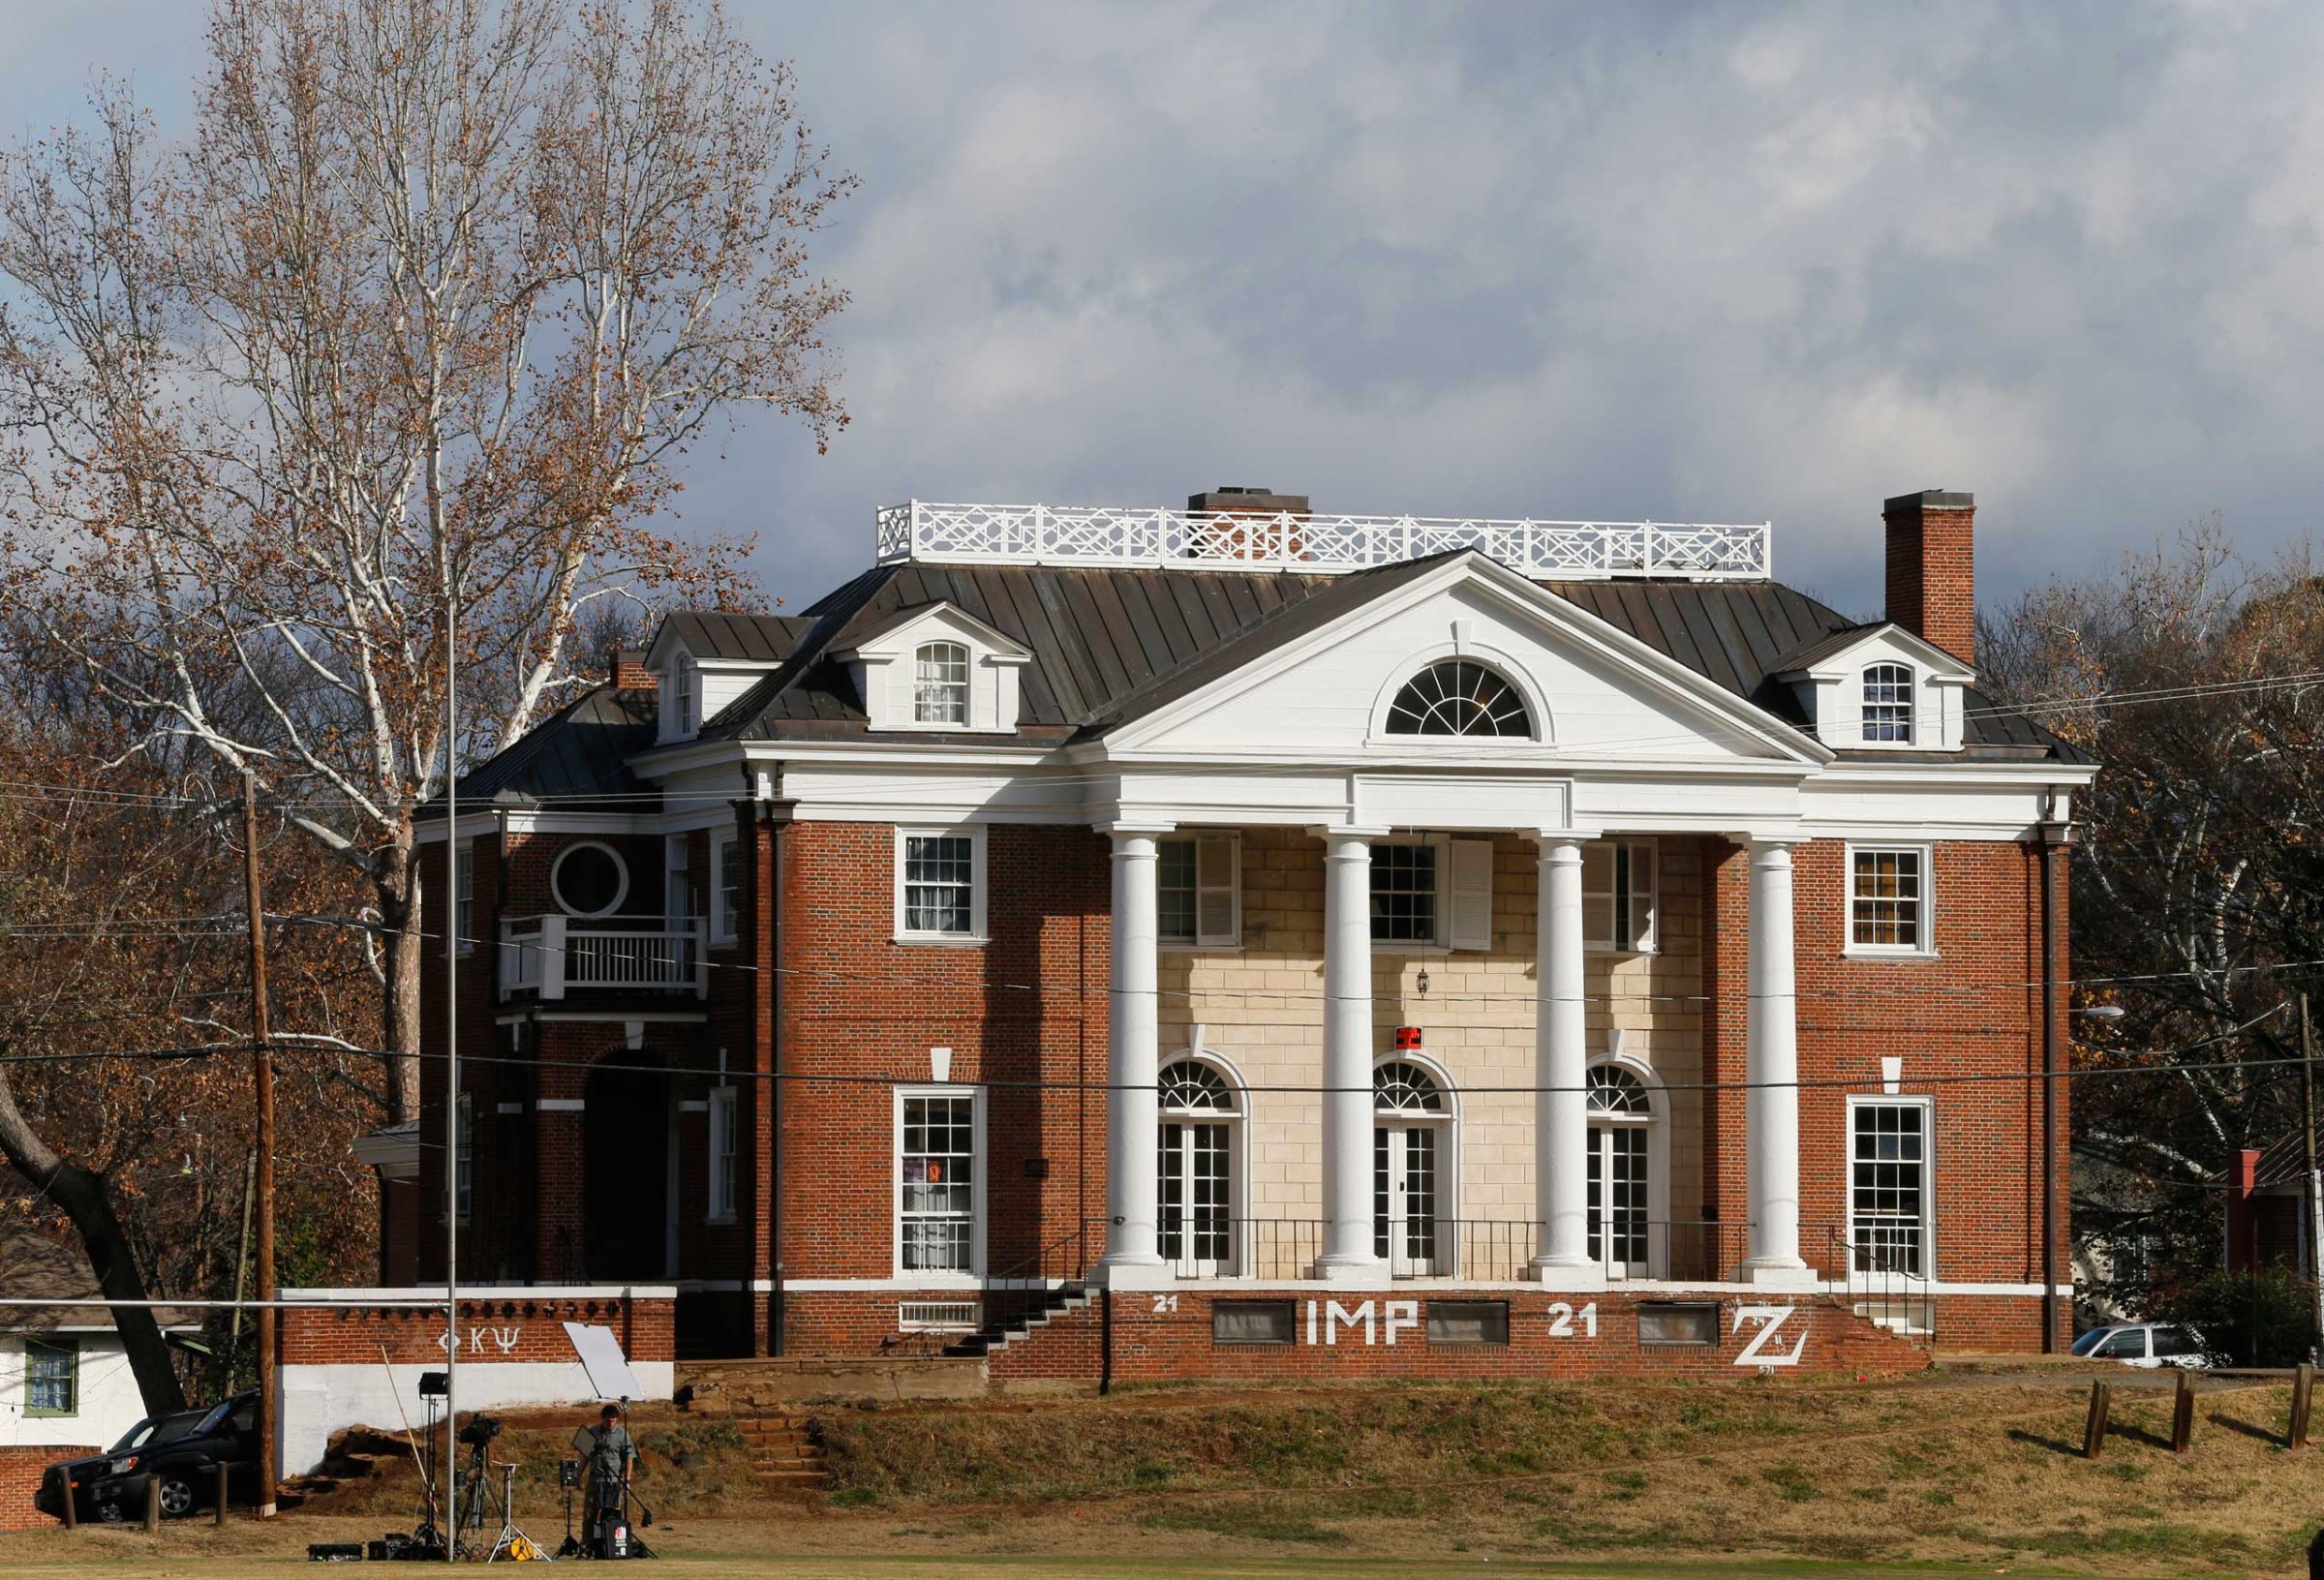 The Phi Kappa Psi fraternity house at the University of Virginia in Charlottesville, Va., Nov. 24, 2014. A Rolling Stone article last week alleged a gang rape at the house which has since suspended operations.